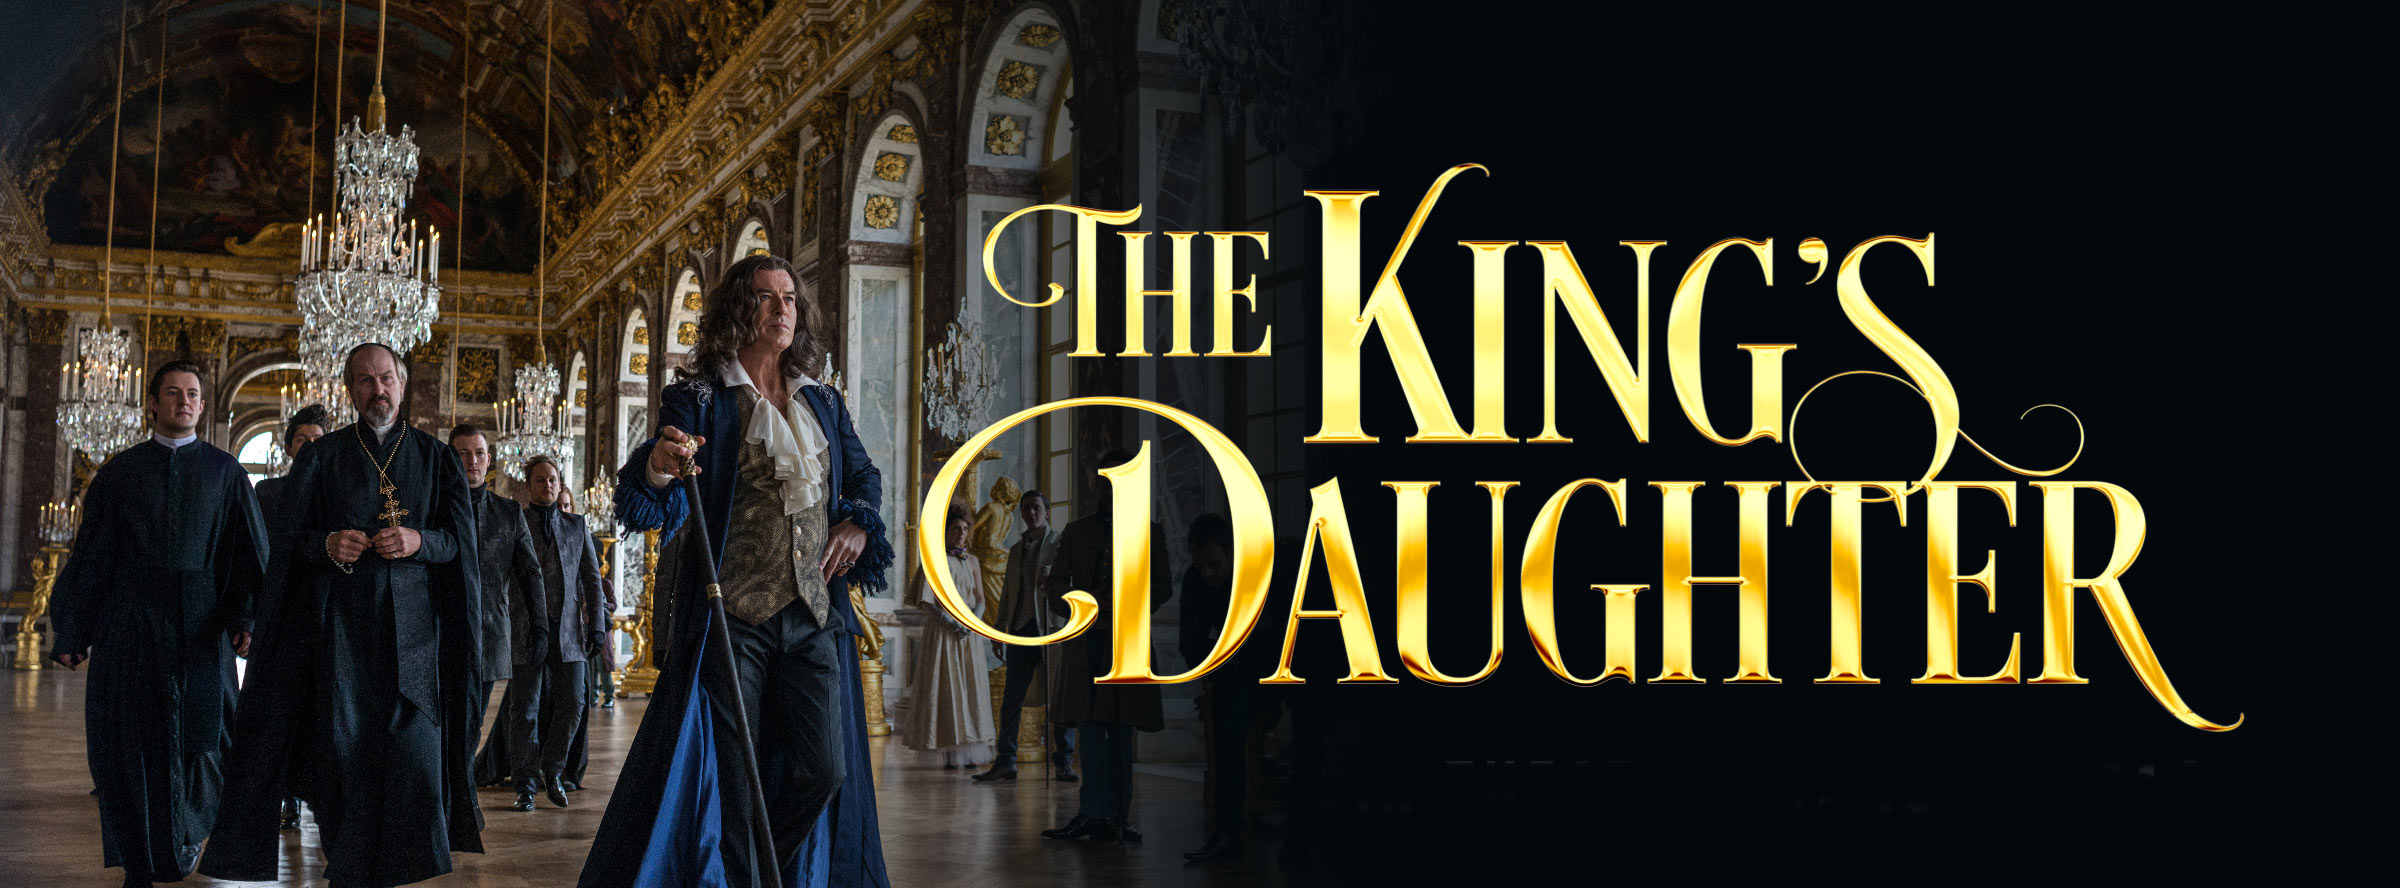 Slider Image for The King's Daughter